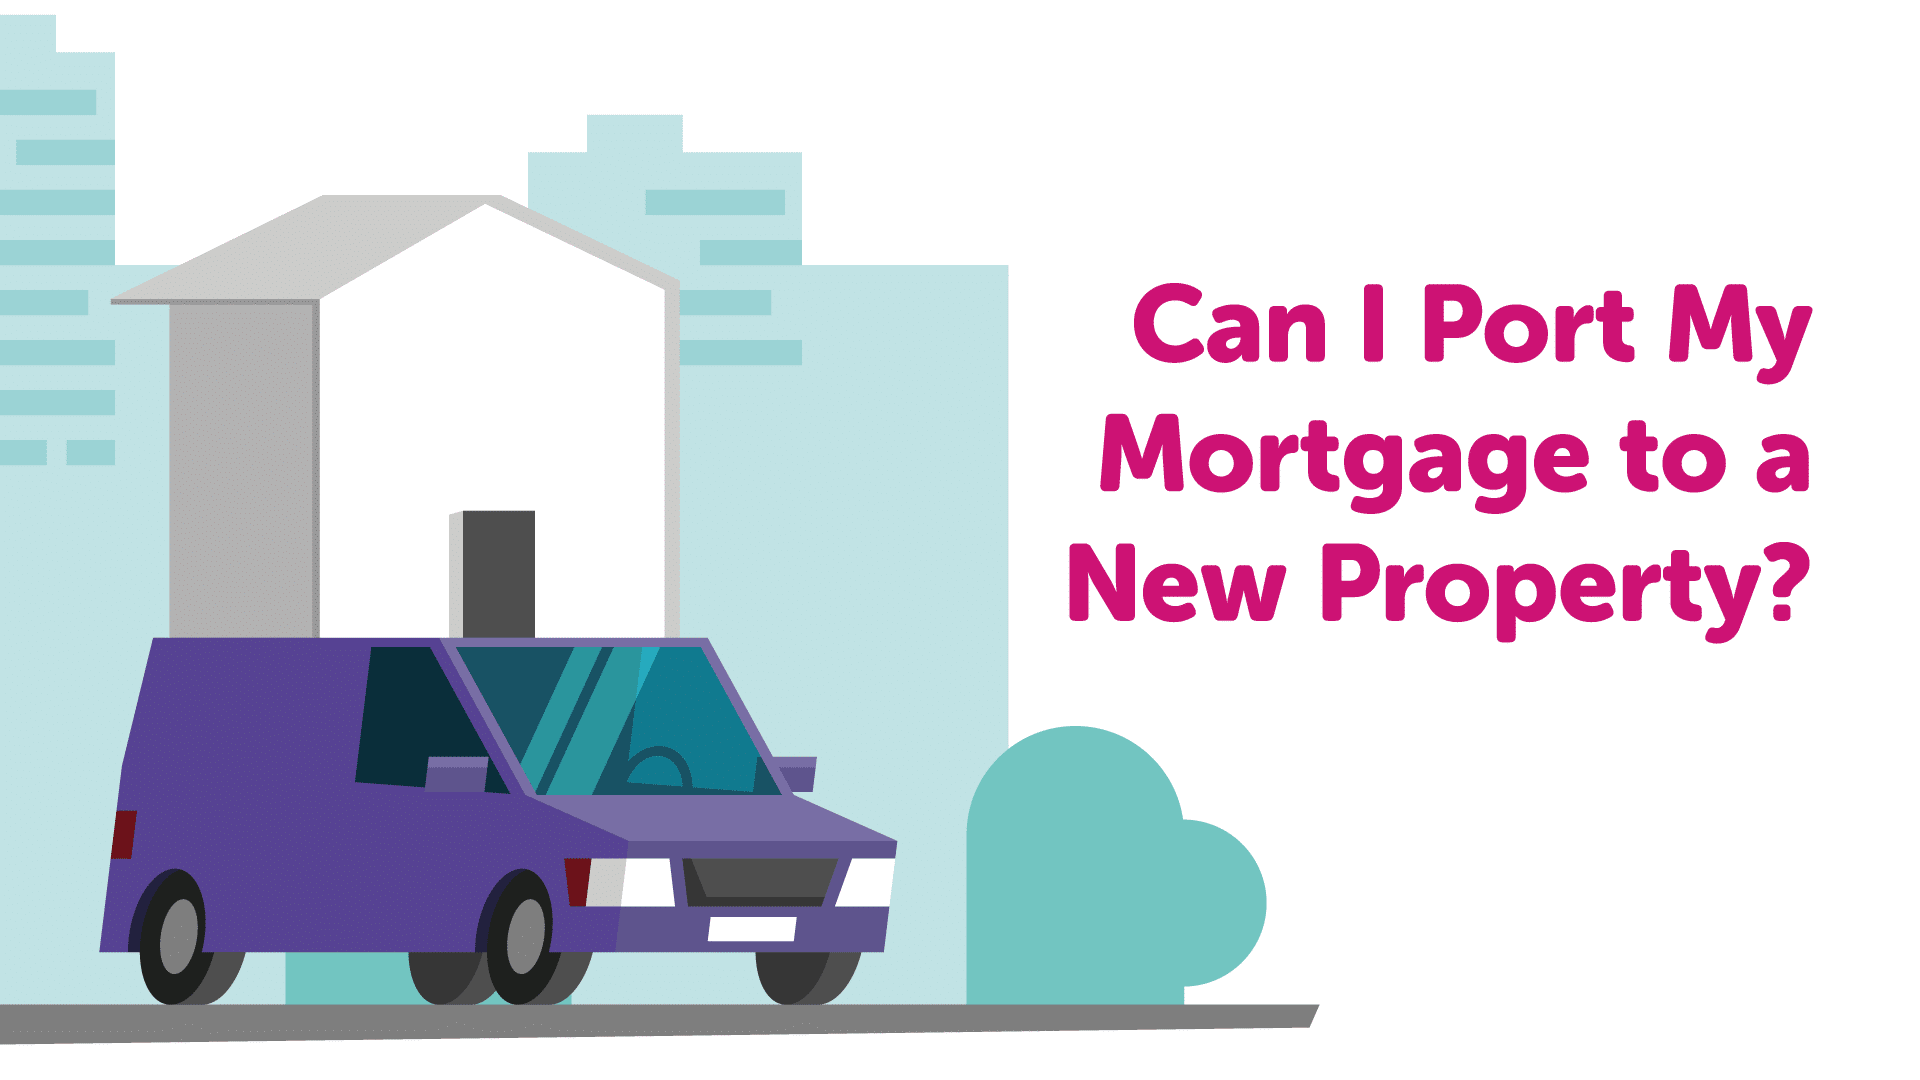 Can I Port my Mortgage to a New Property in Doncaster?